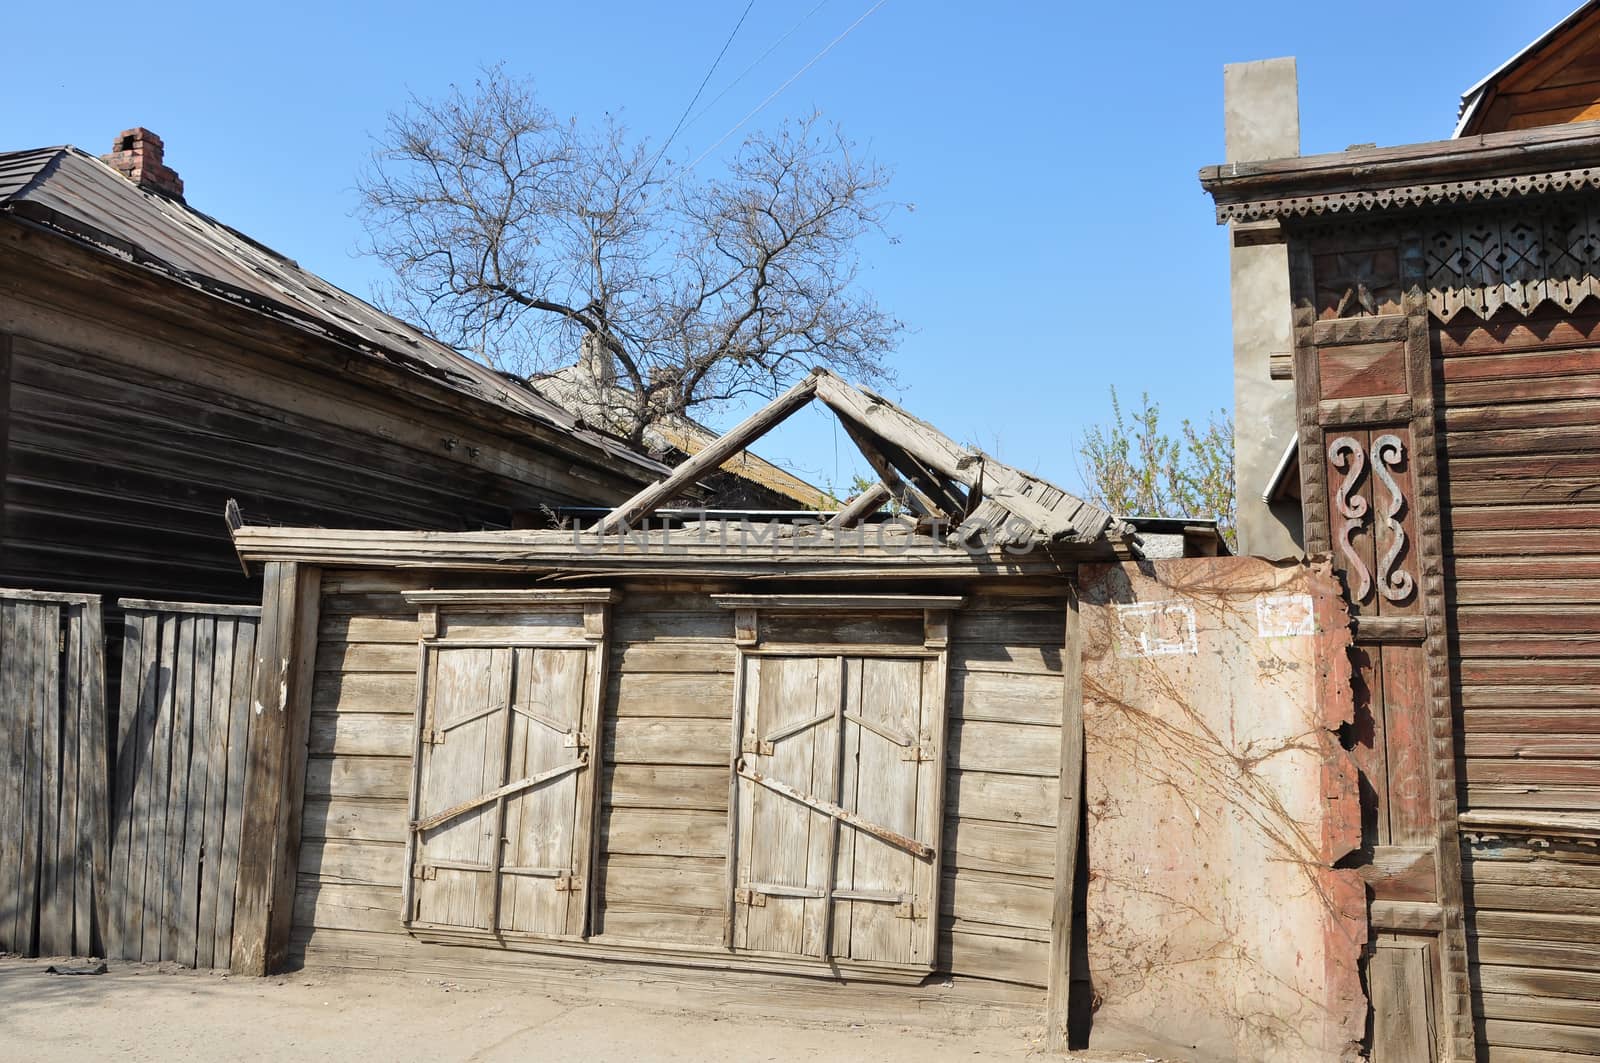 The old wooden house without roof in the city of Astrakhan 